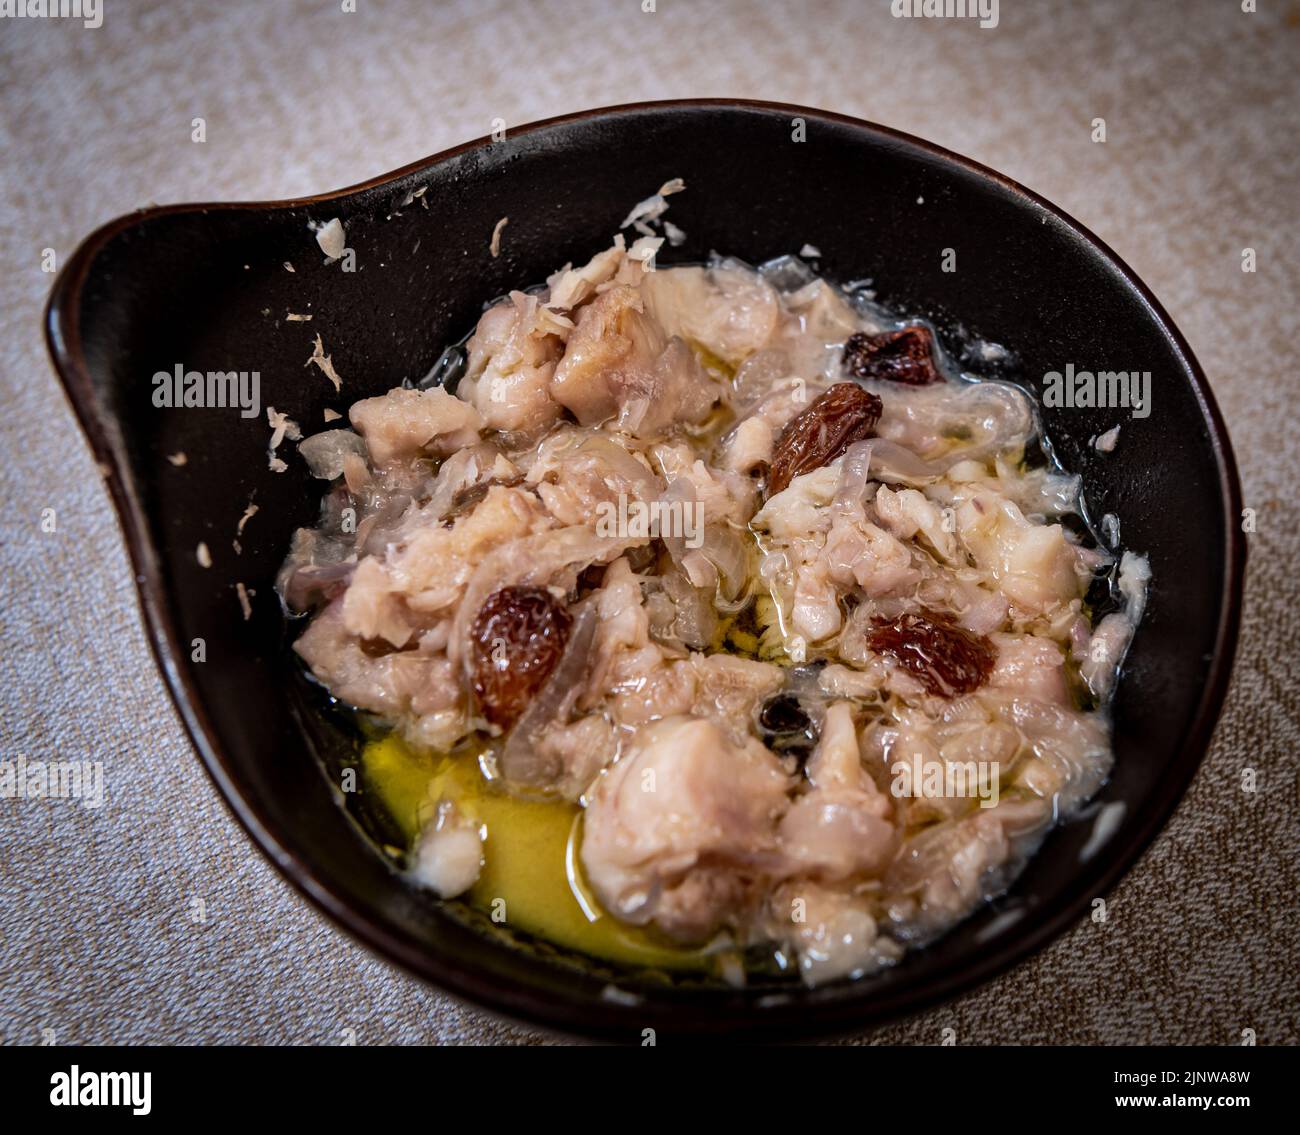 specialties like 'sarde in saor', typical Venetian dish. traditional appetizer with sardines, pine nuts and sultanas Stock Photo